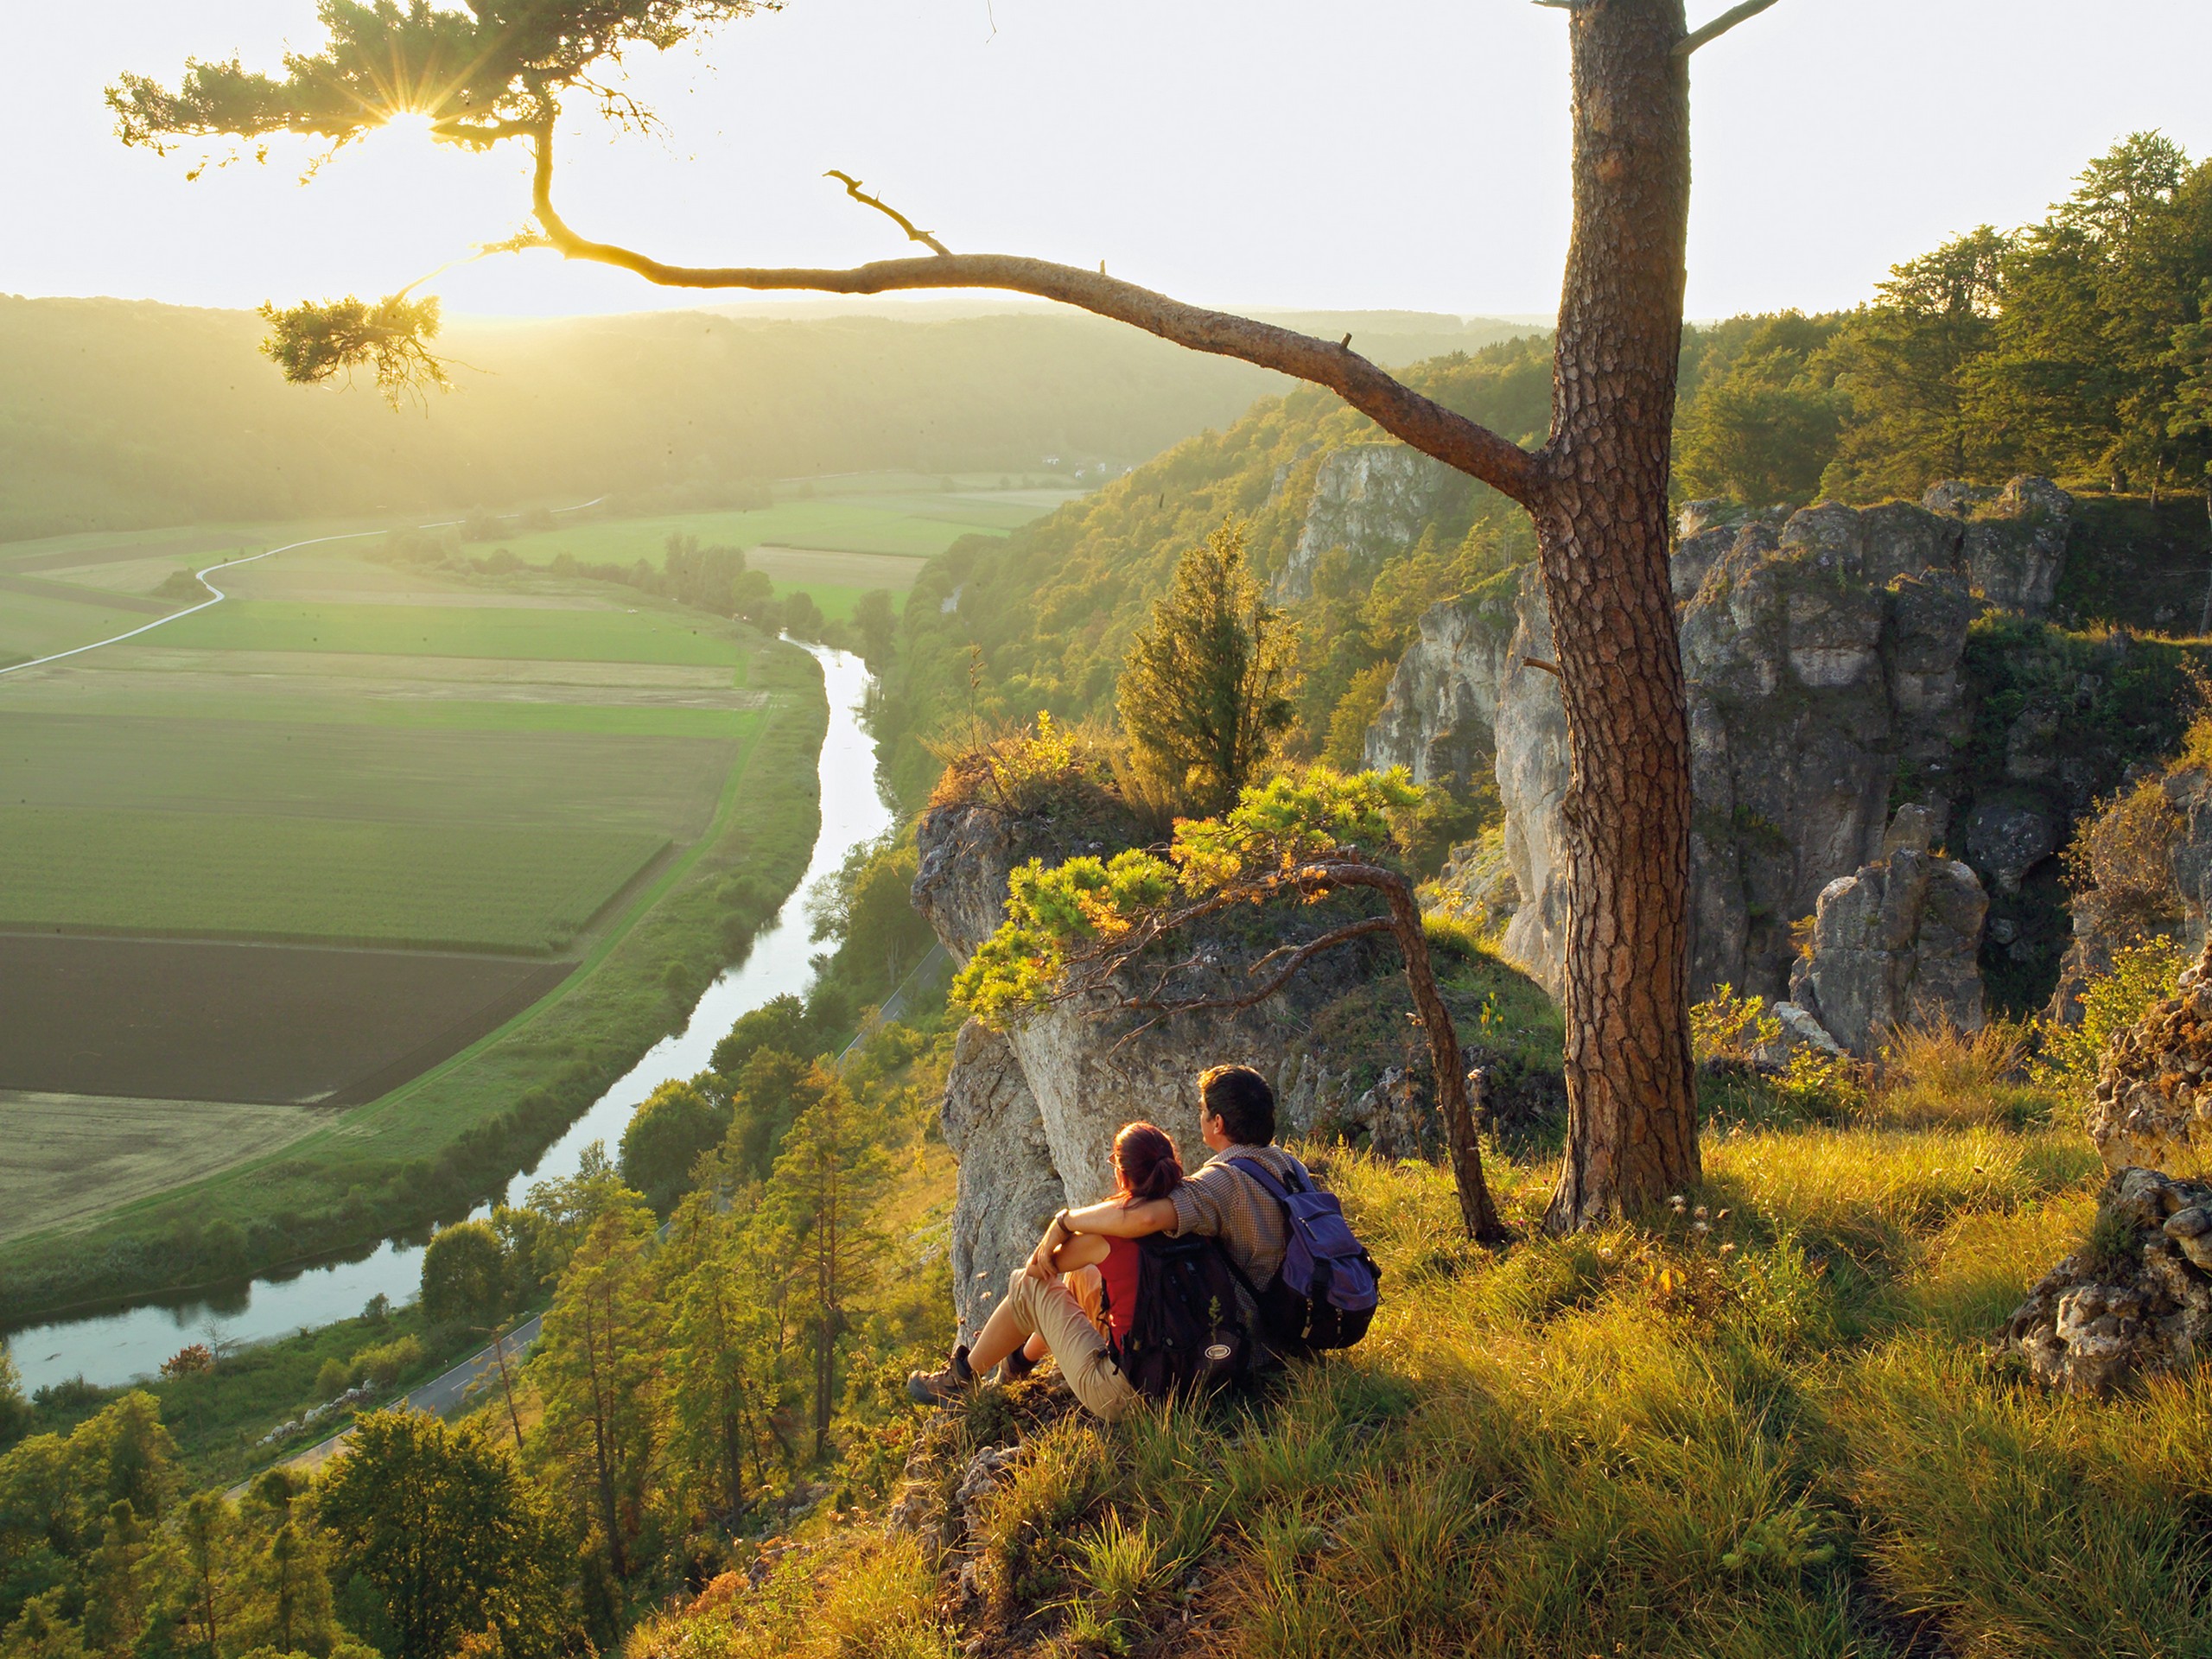 Altmühltal Panorama Trail Tour - Couple sitting and looking at the river below